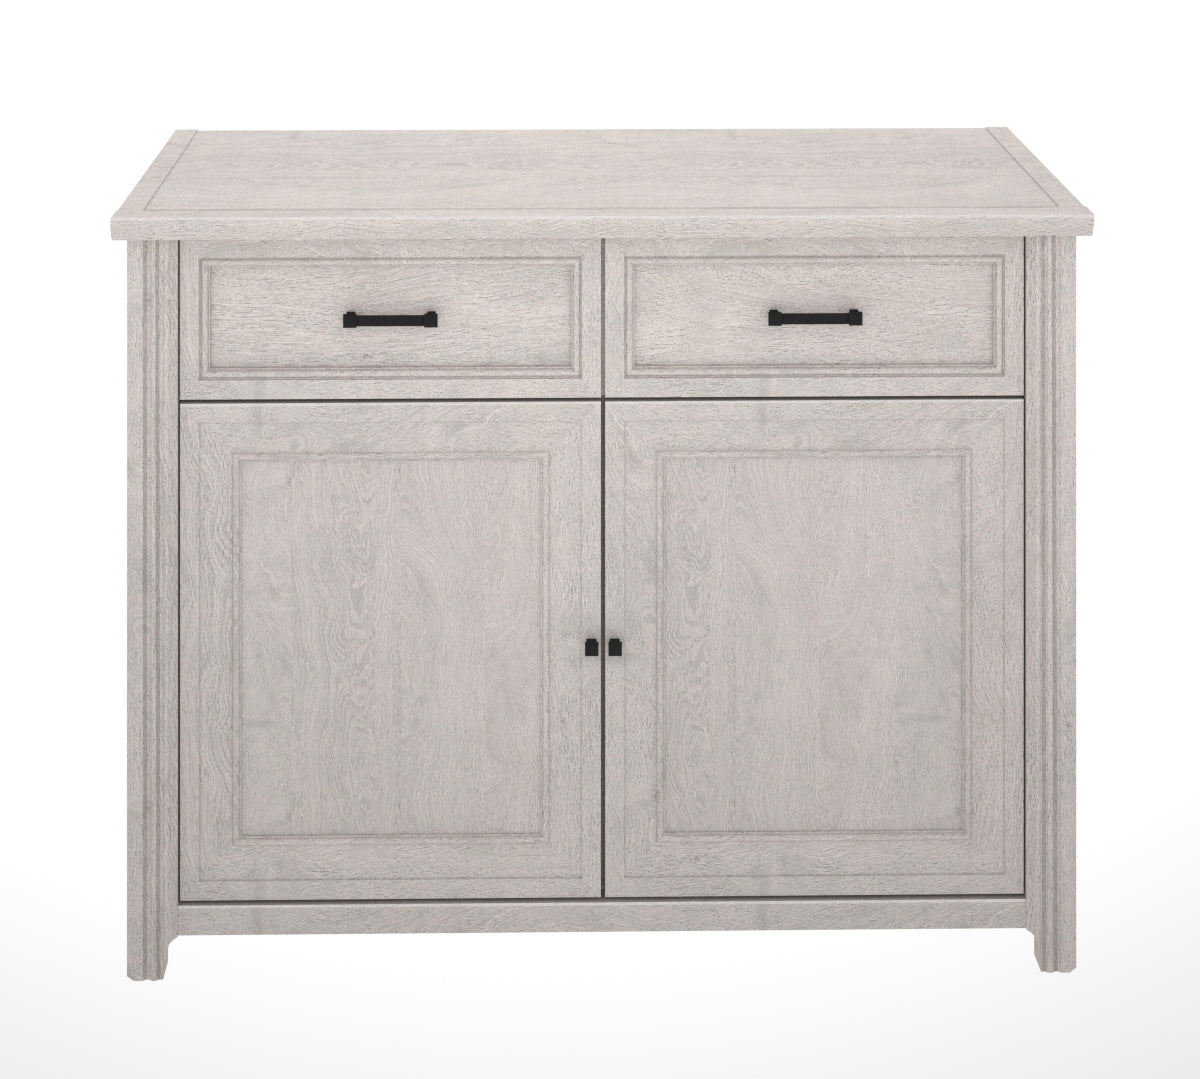 Sideboard 2 doors / 2 drawers imitation bleached oak, French manufacture